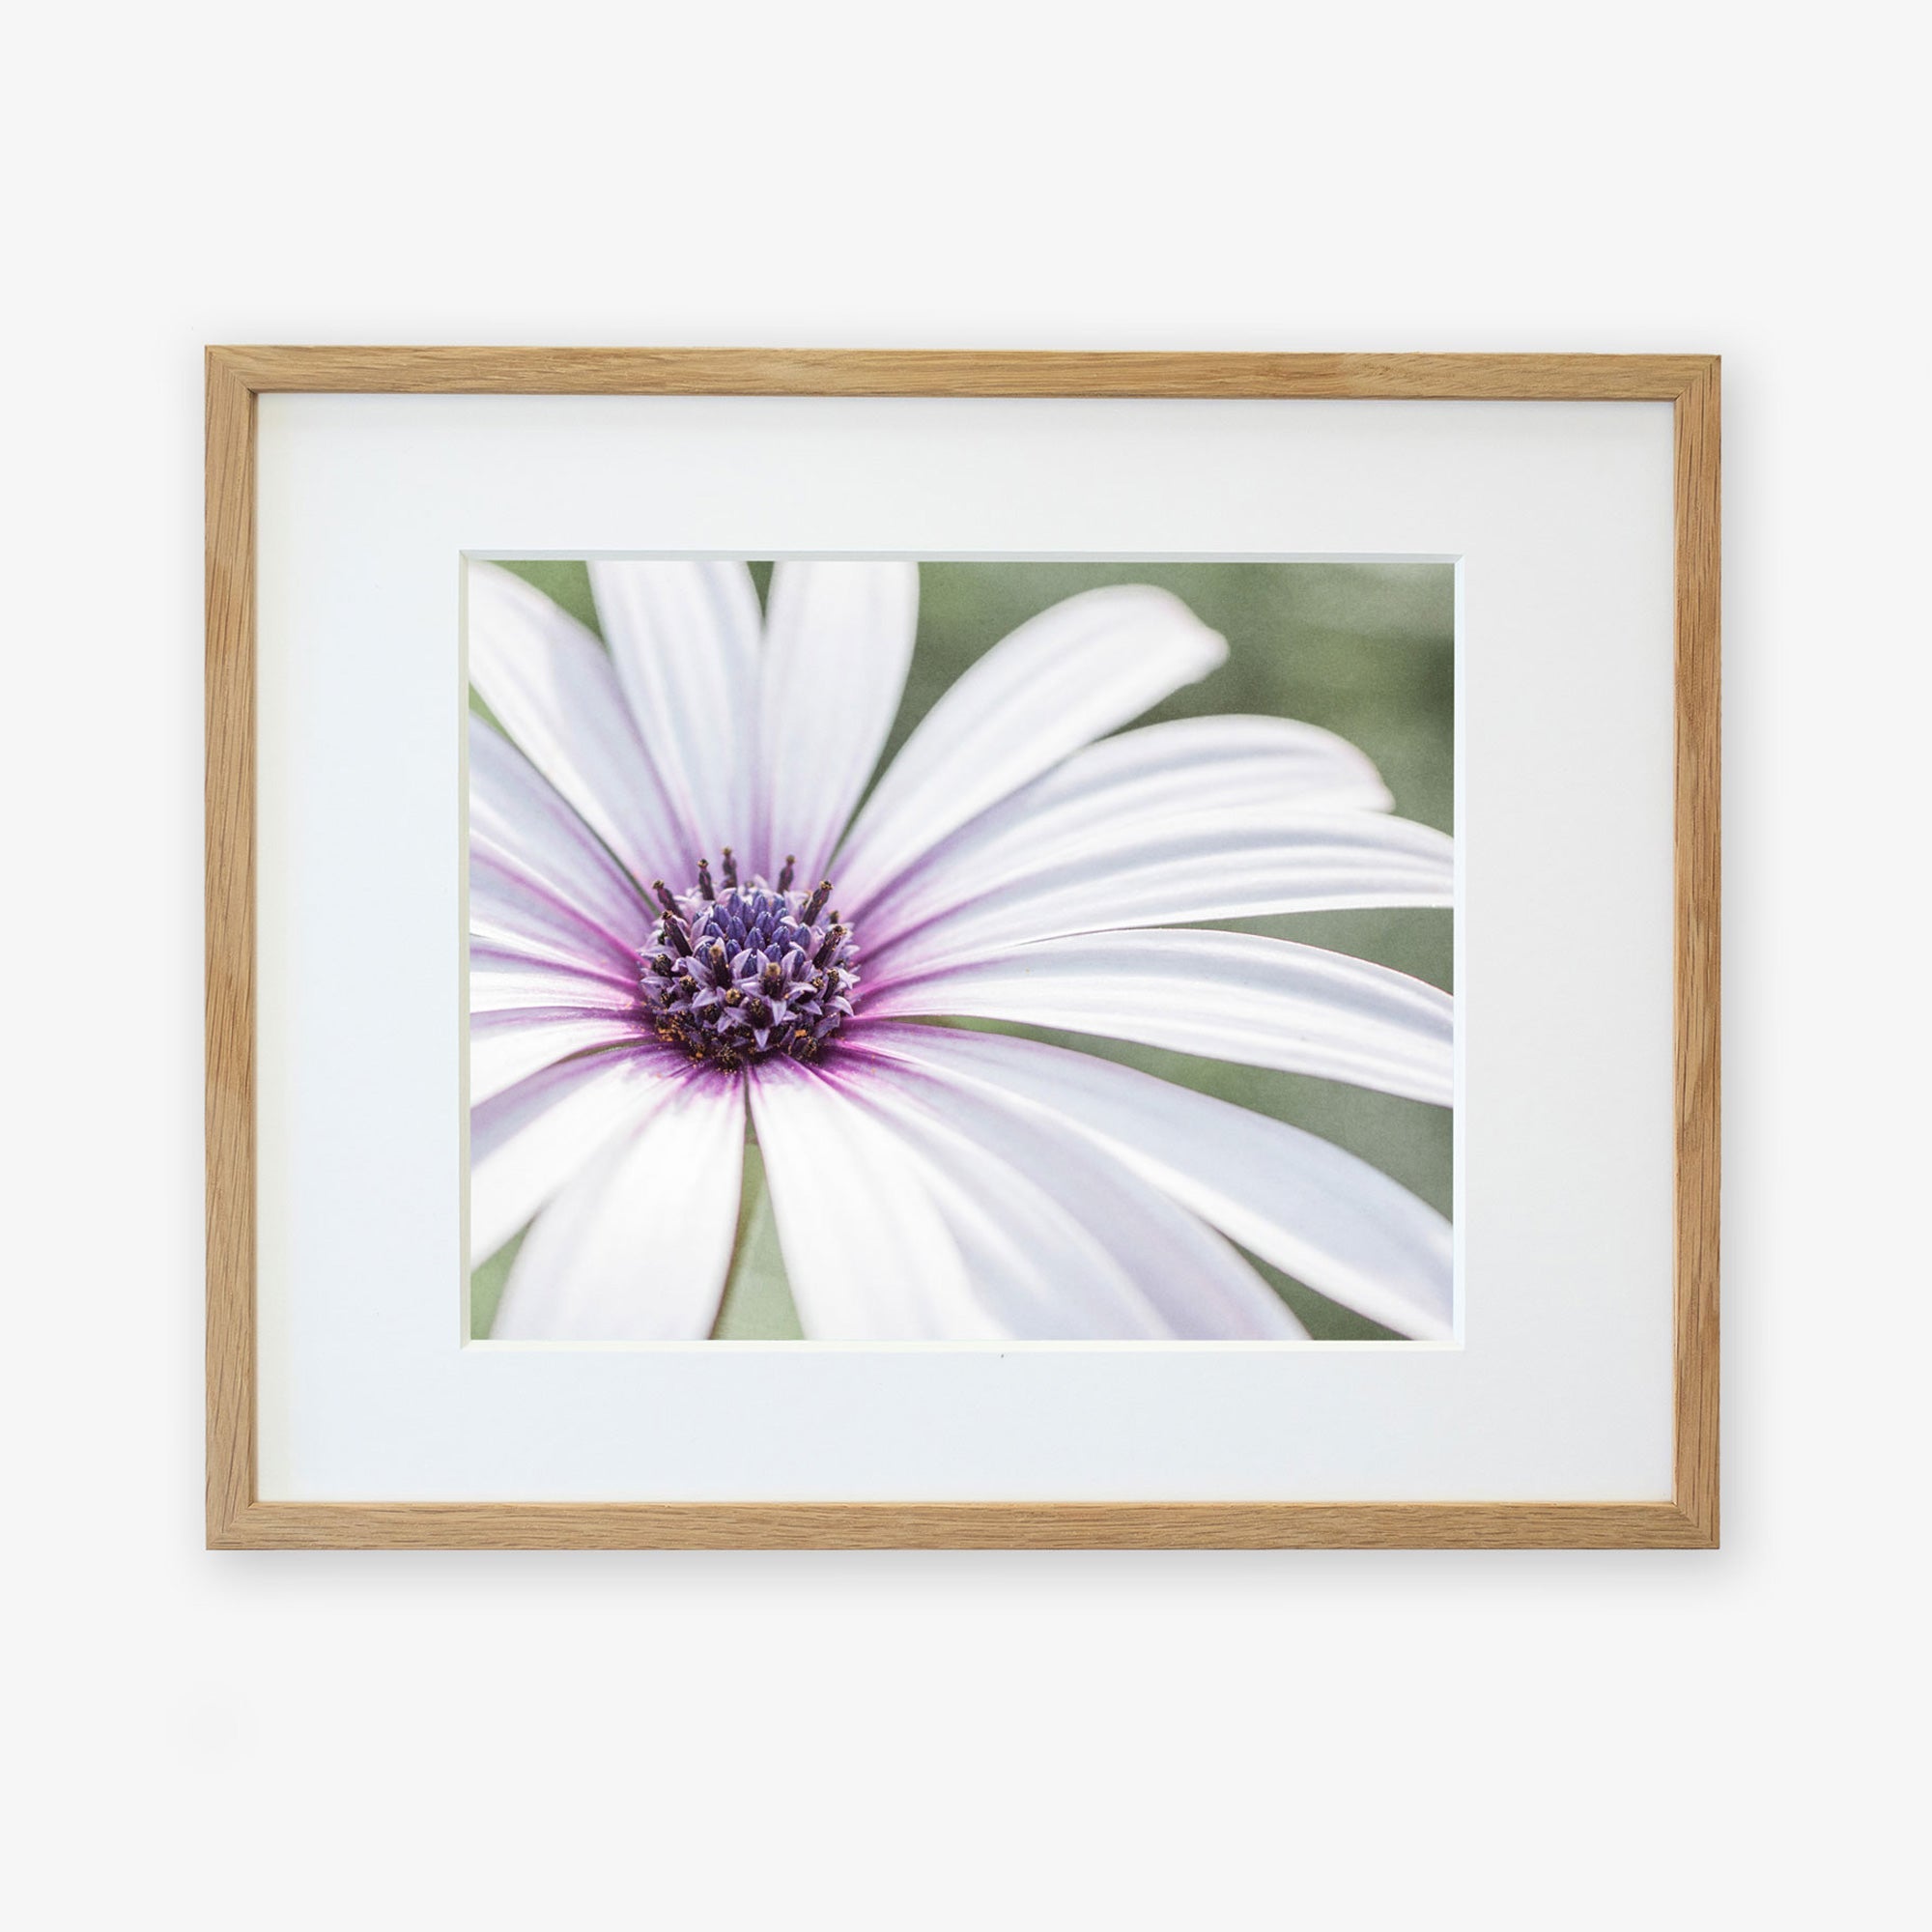 A framed photograph of a Large White Daisy Flower Print, 'Bed of Petals' by Offley Green, with long petals and a detailed, textured center, printed on archival photographic paper, displayed against a white background.